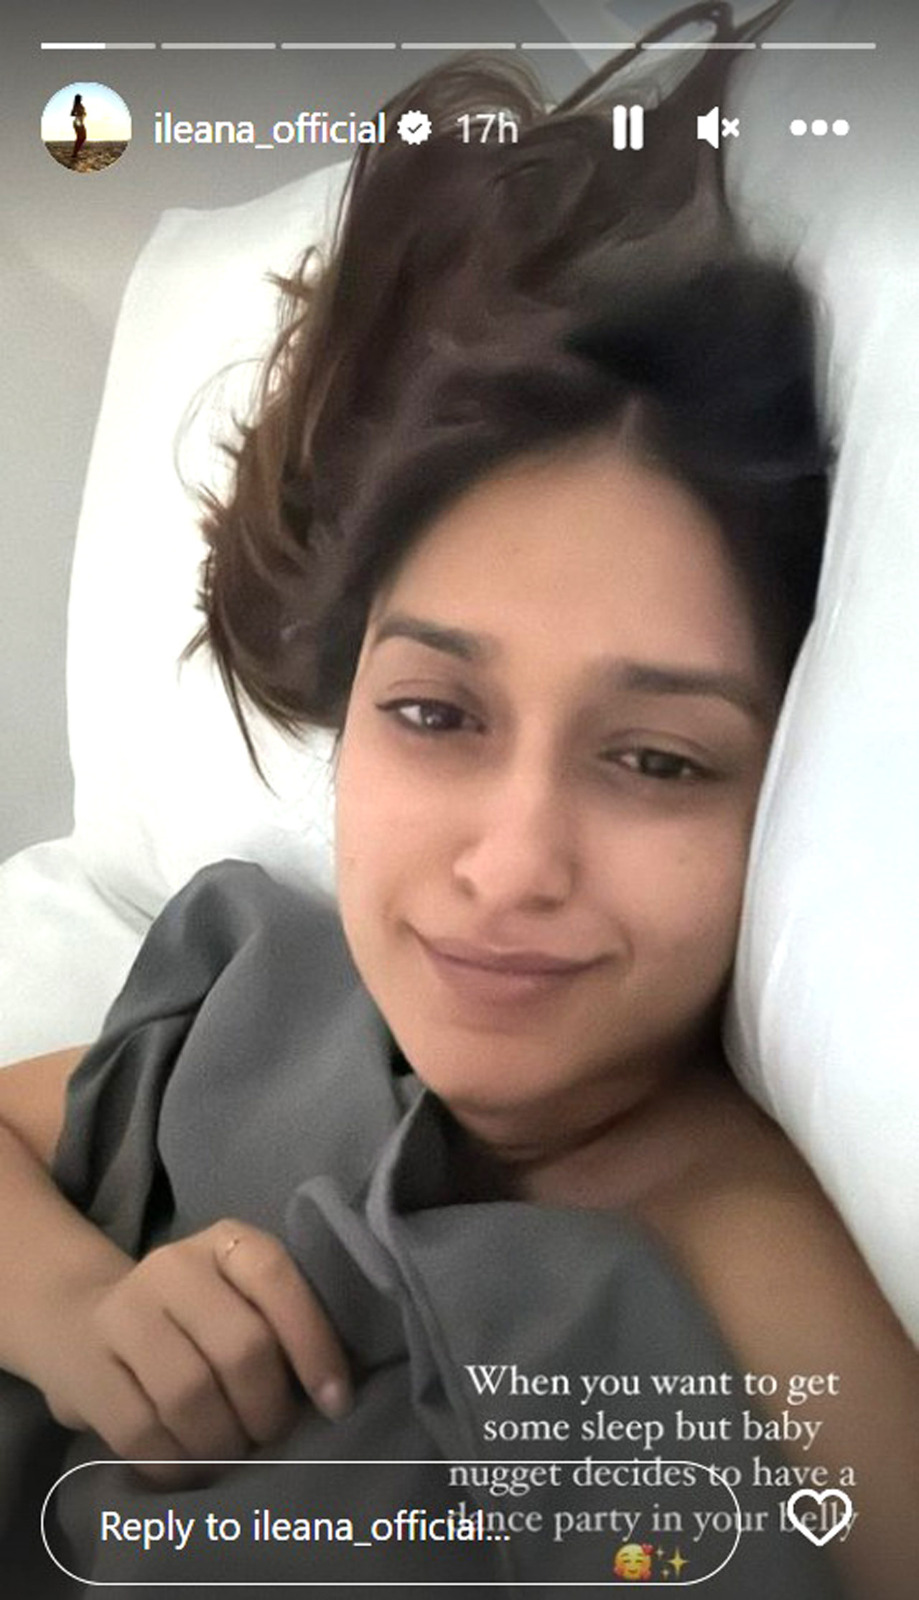 Ileana D'Cruz's unborn baby keeps her up all night with “dance parties”